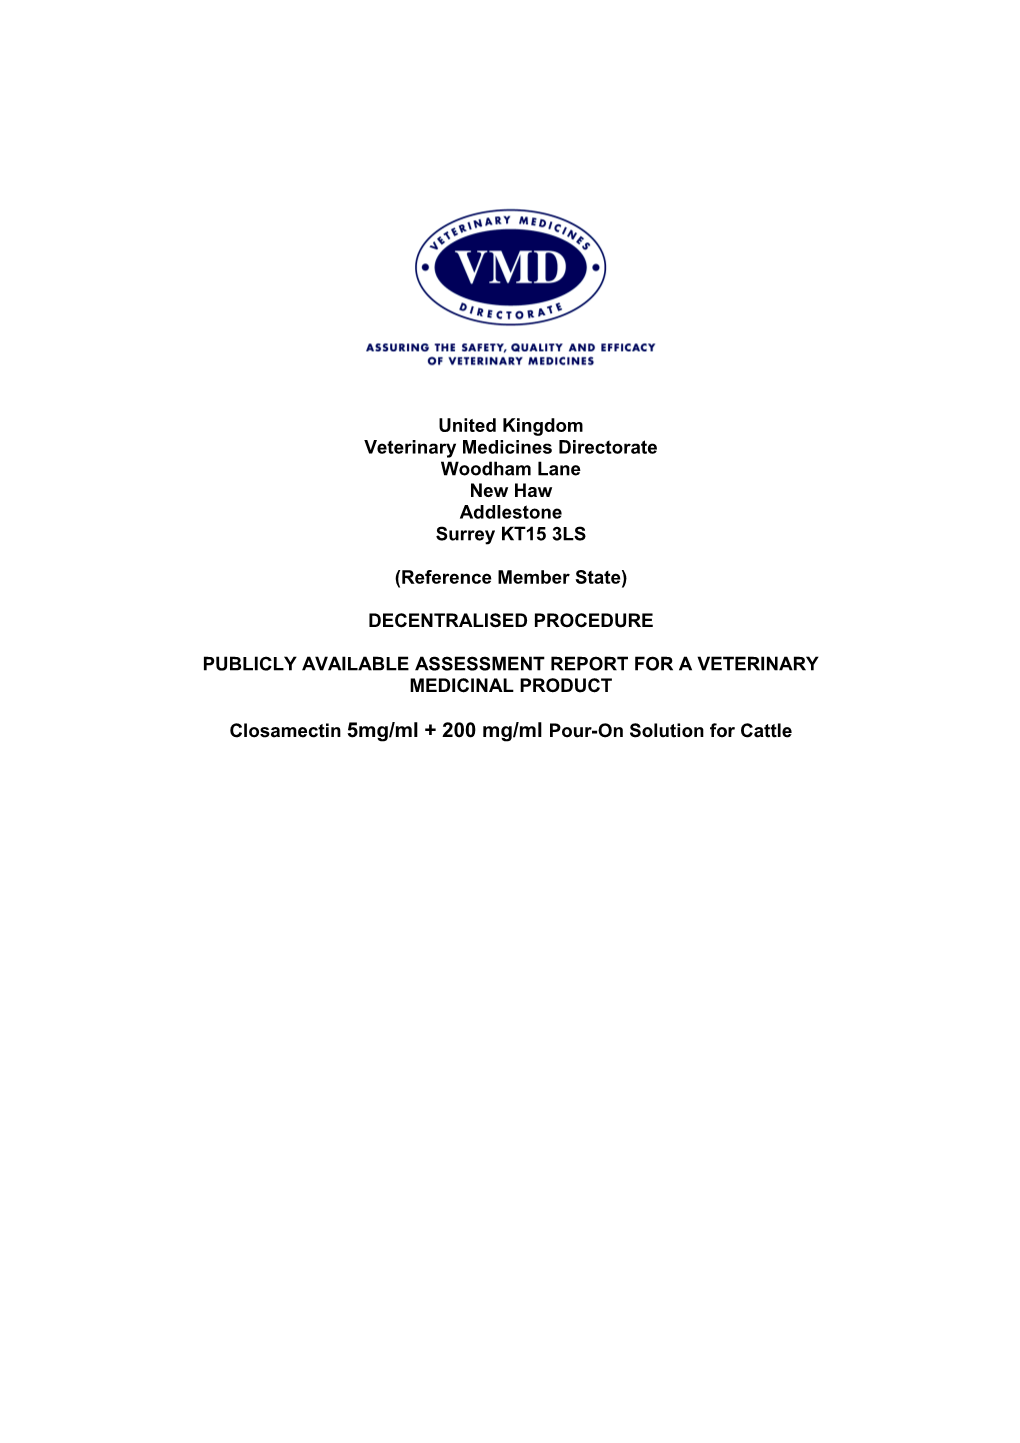 Publicly Available Assessment Report for a Veterinary Medicinal Product s1